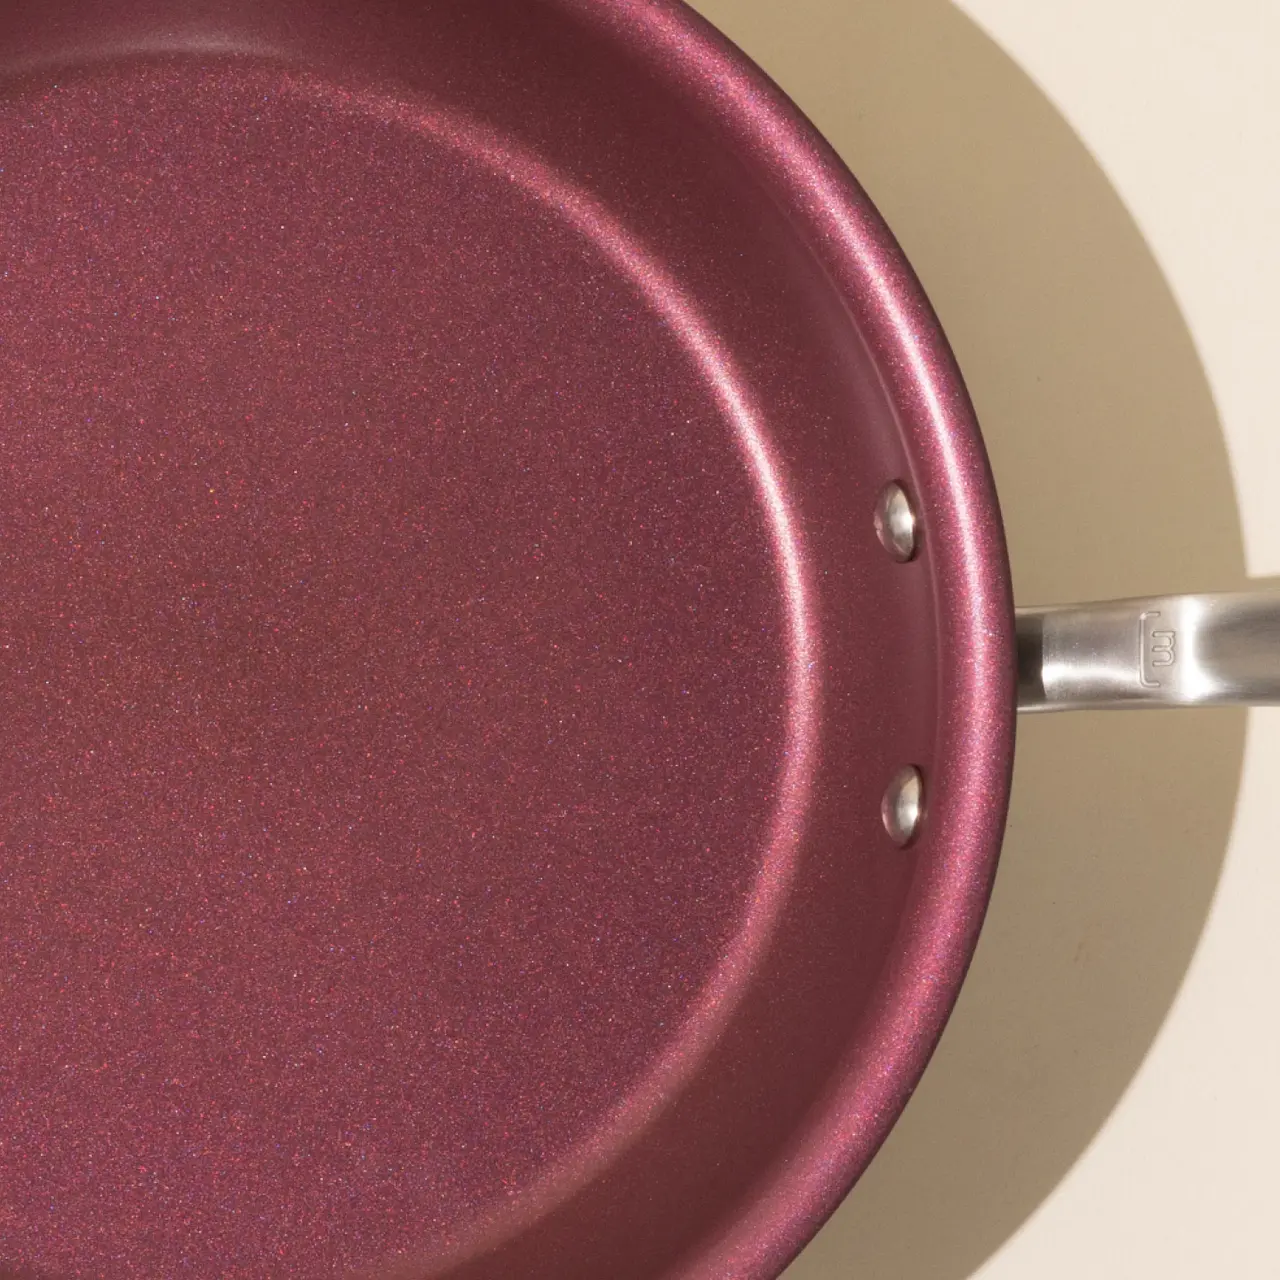 A close-up of a burgundy colored non-stick frying pan with a silver handle, casting a shadow on a beige surface.